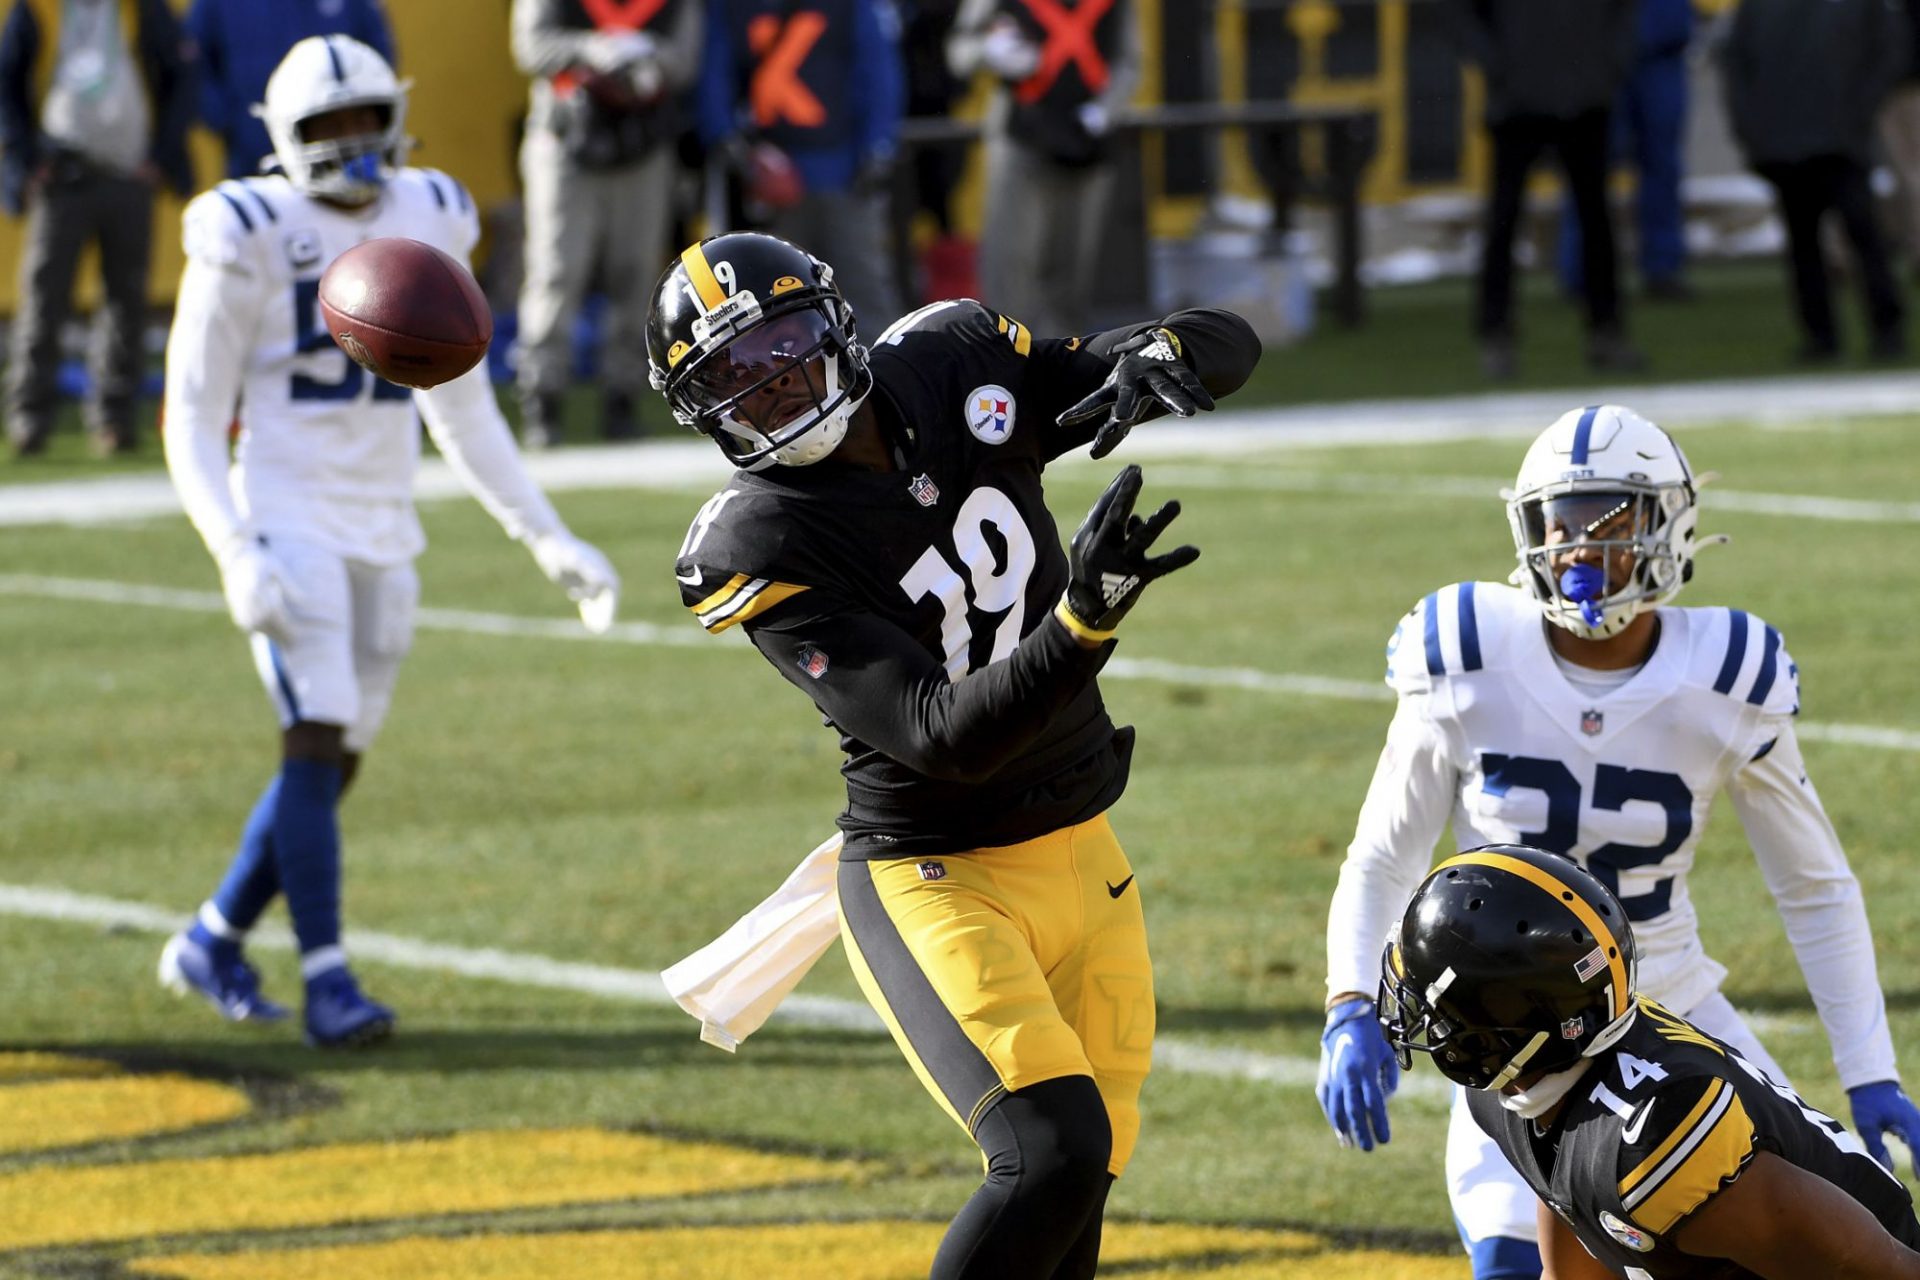 Steelers WR JuJu Smith-Schuster admits the team had no energy in 1st half